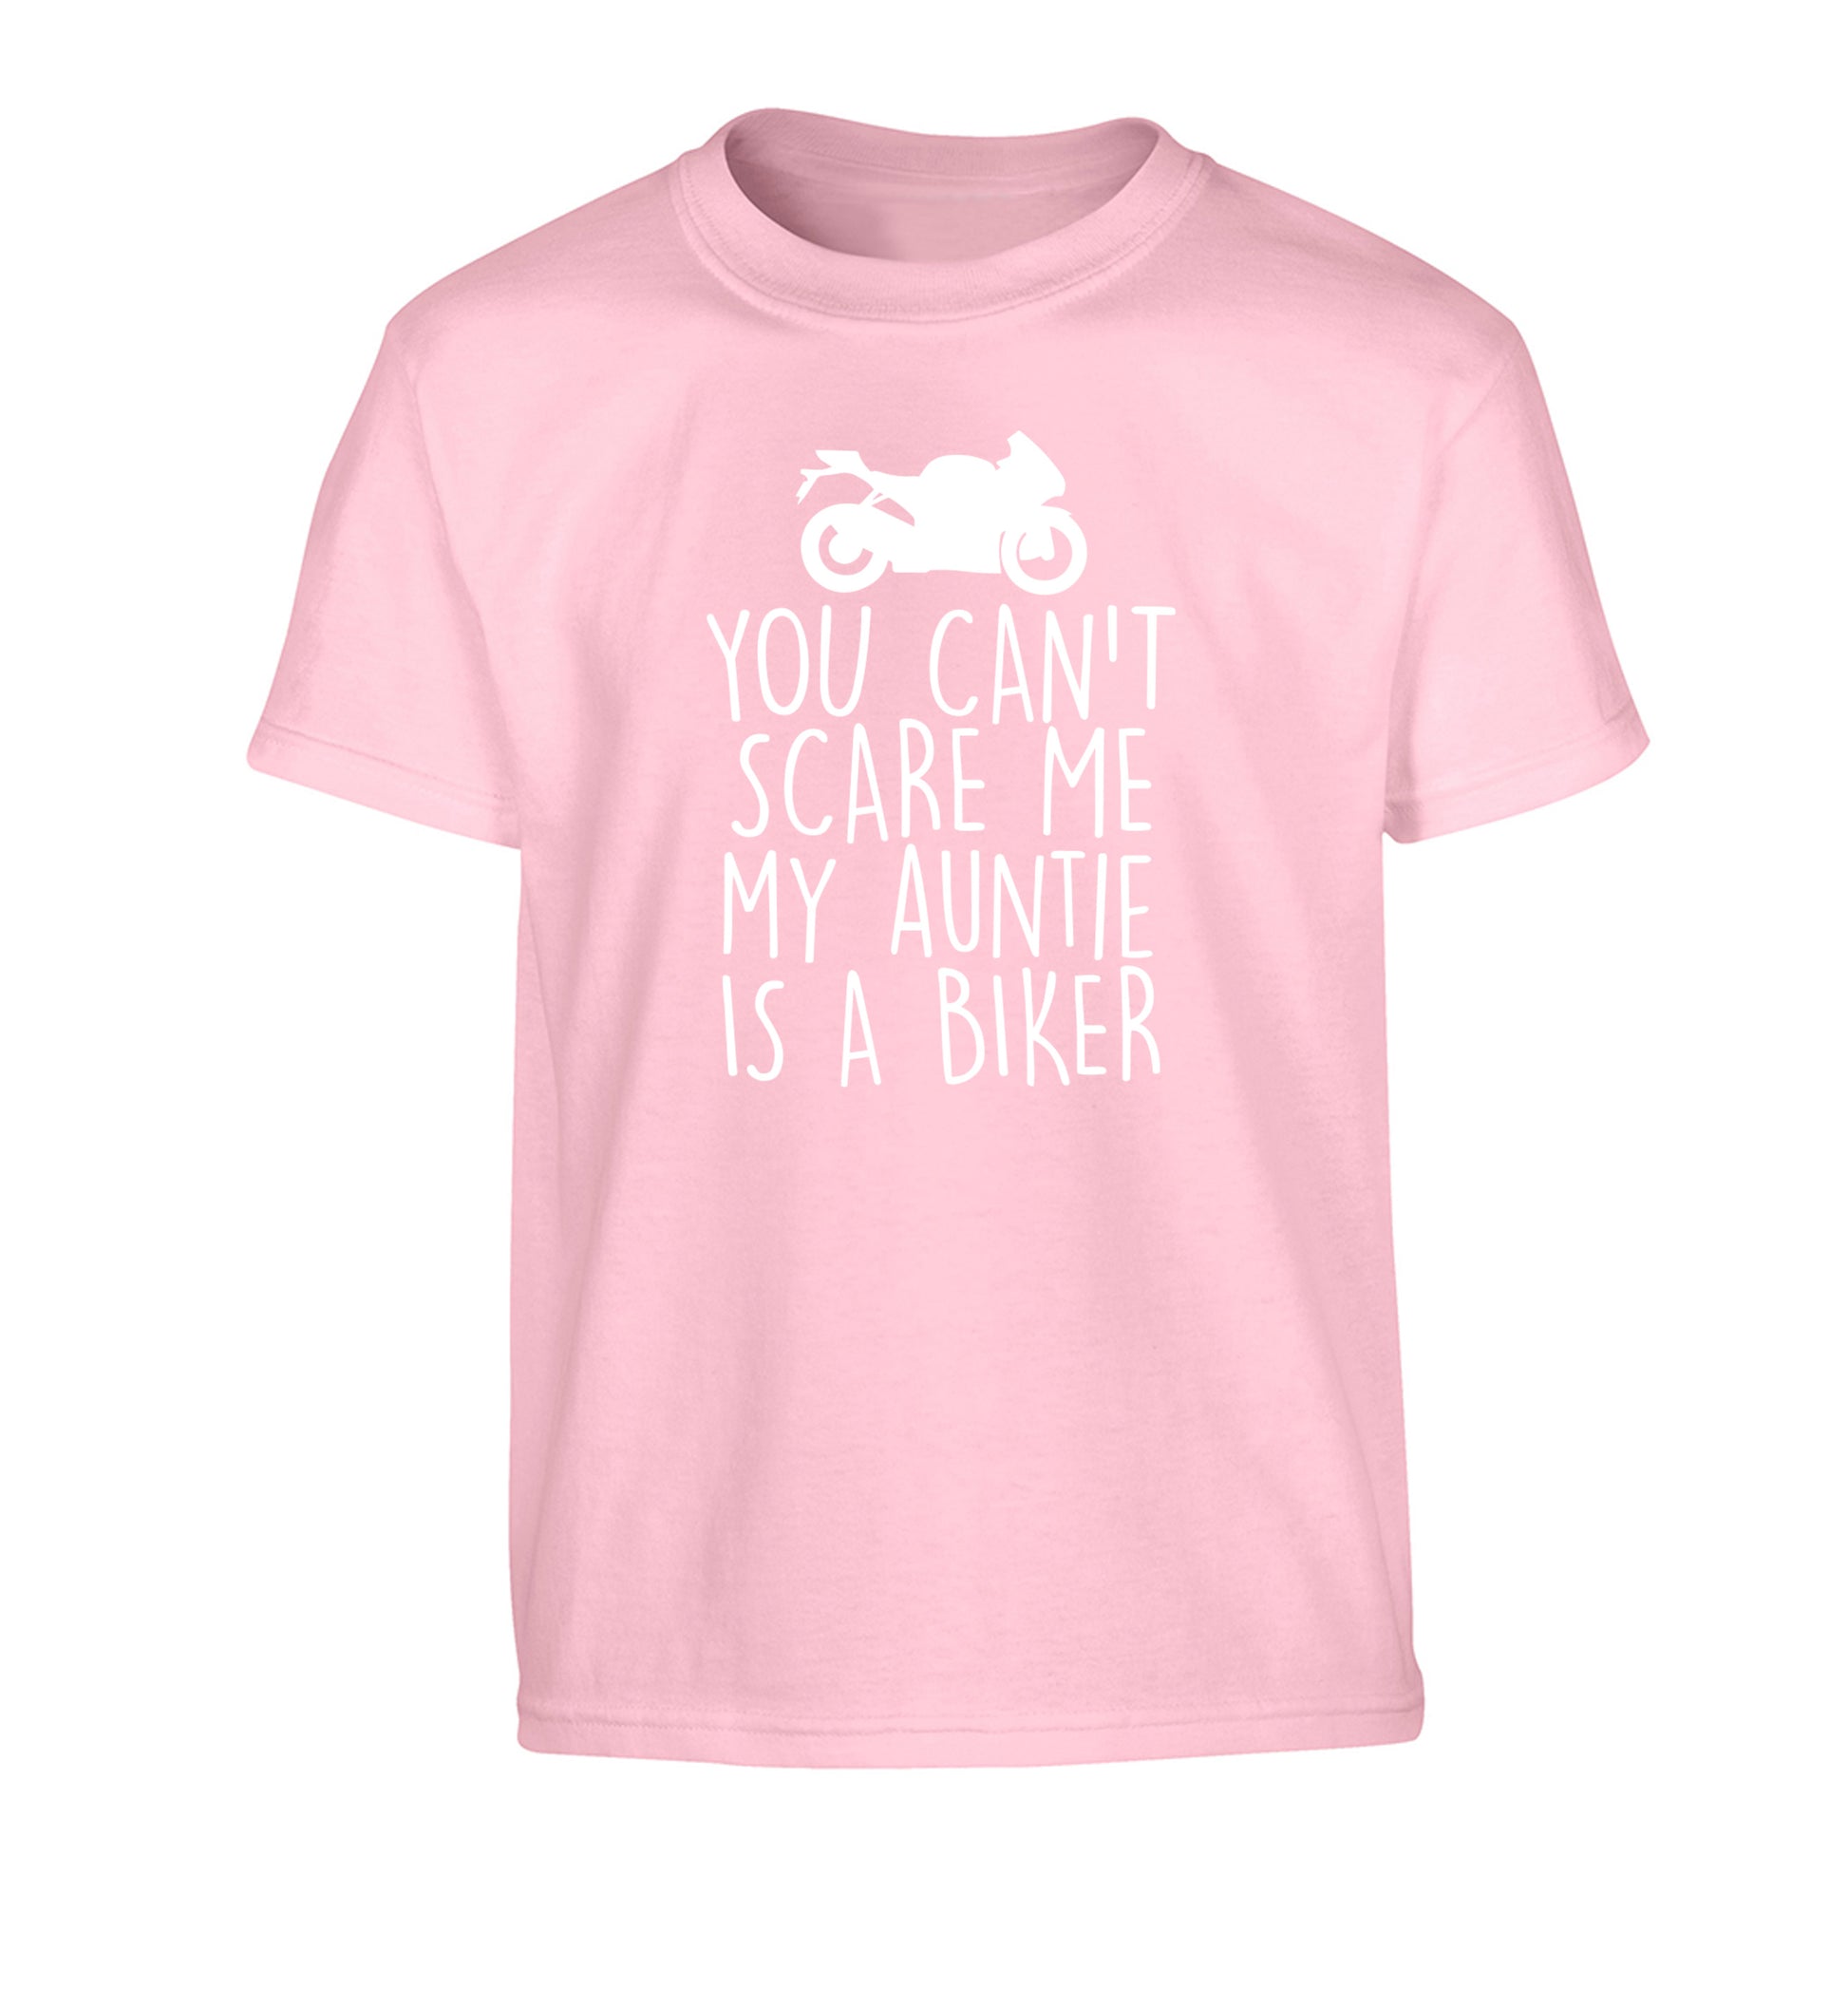 You can't scare me my auntie is a biker Children's light pink Tshirt 12-13 Years